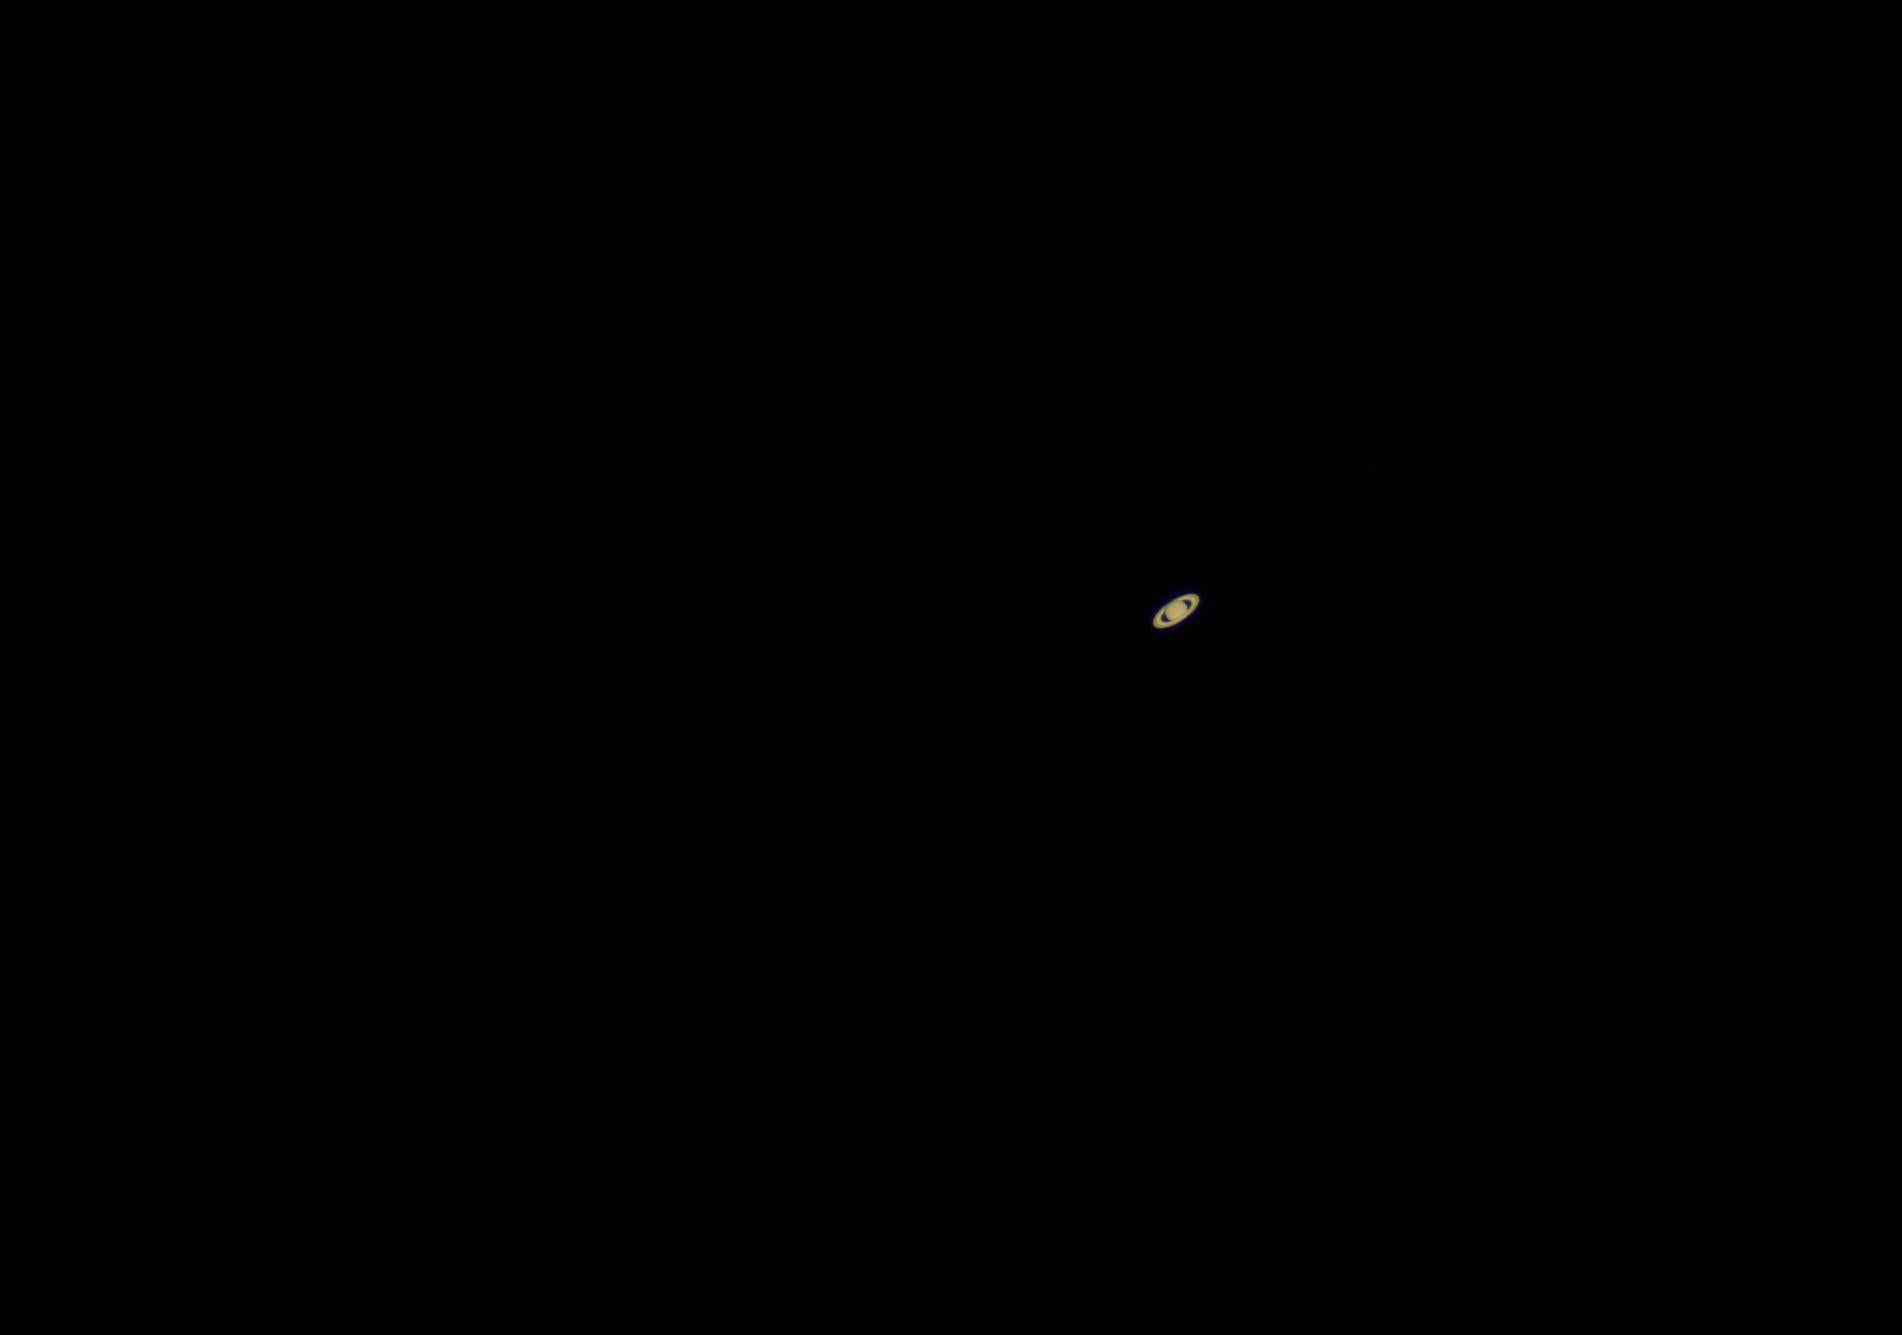 An image of Saturn taken through our Clark telescope at SCSM